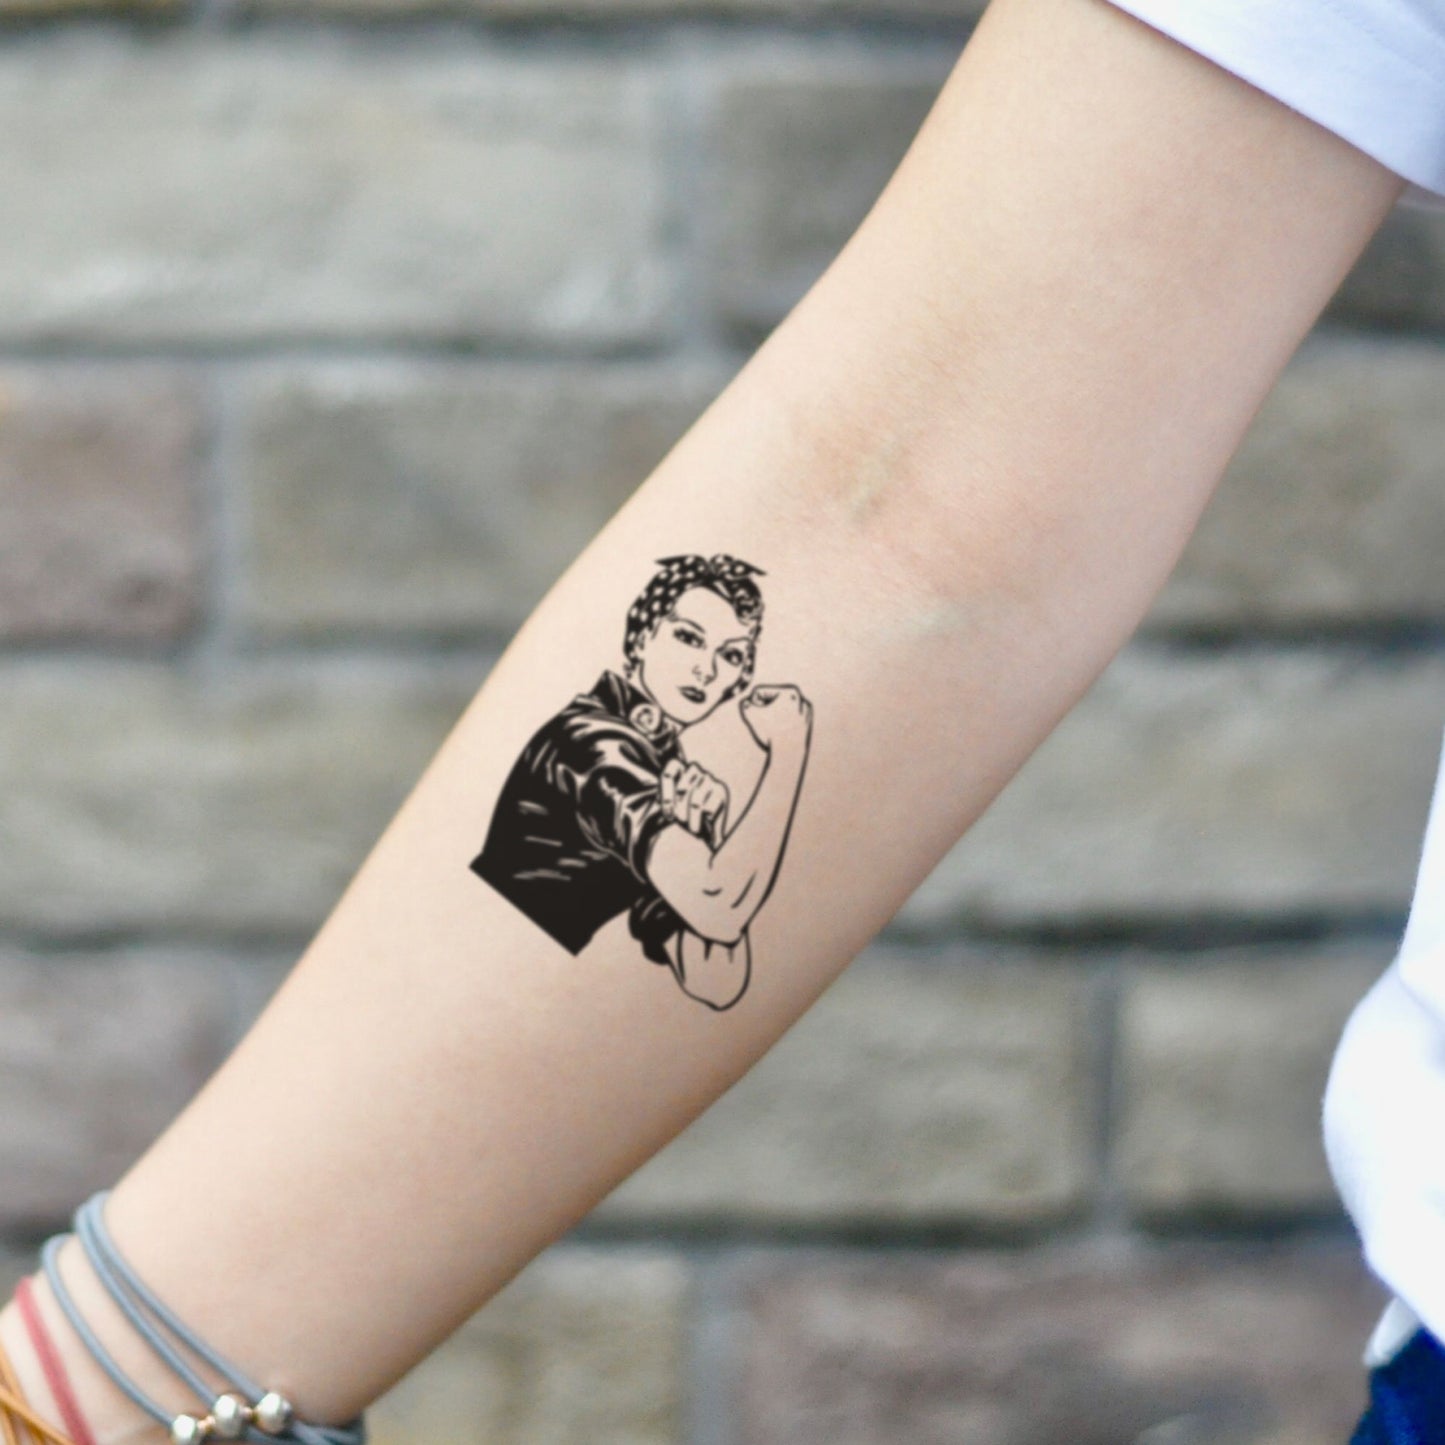 fake small rosie the riveter traditional pin up vintage temporary tattoo sticker design idea on inner arm